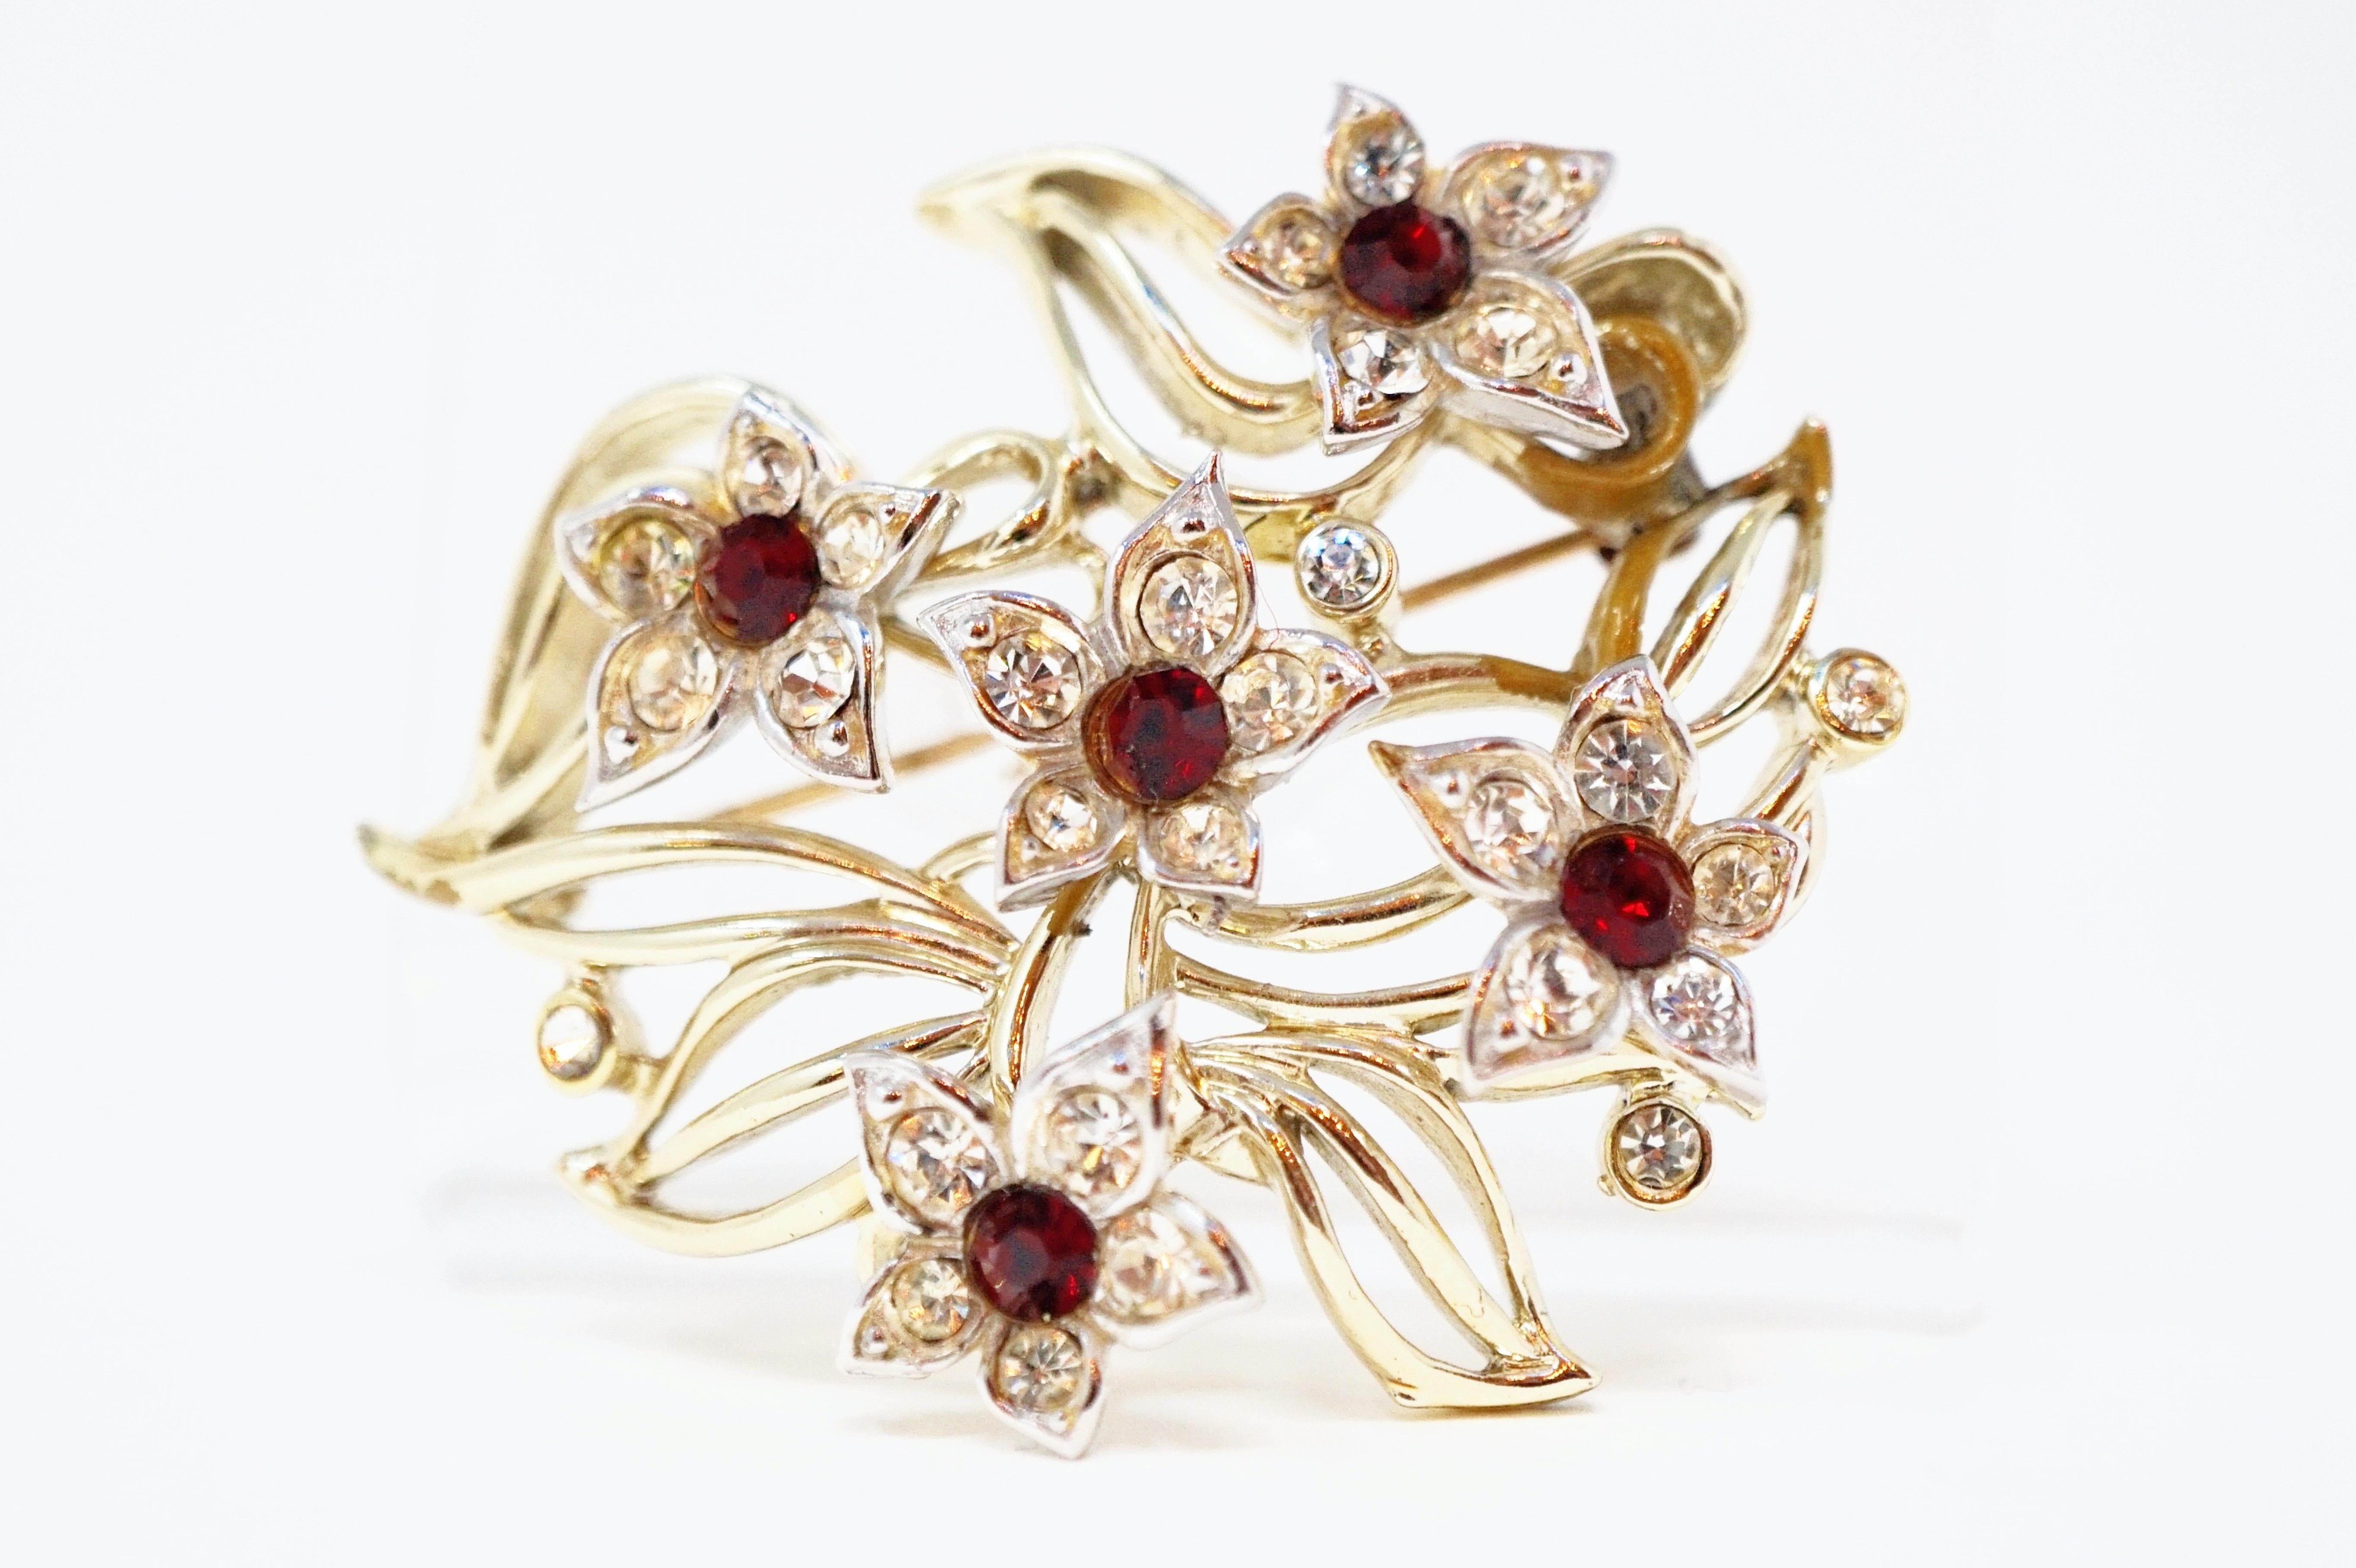 Women's Vintage Kramer Floral Brooch with Ruby Rhinestones, Signed, circa 1940s For Sale